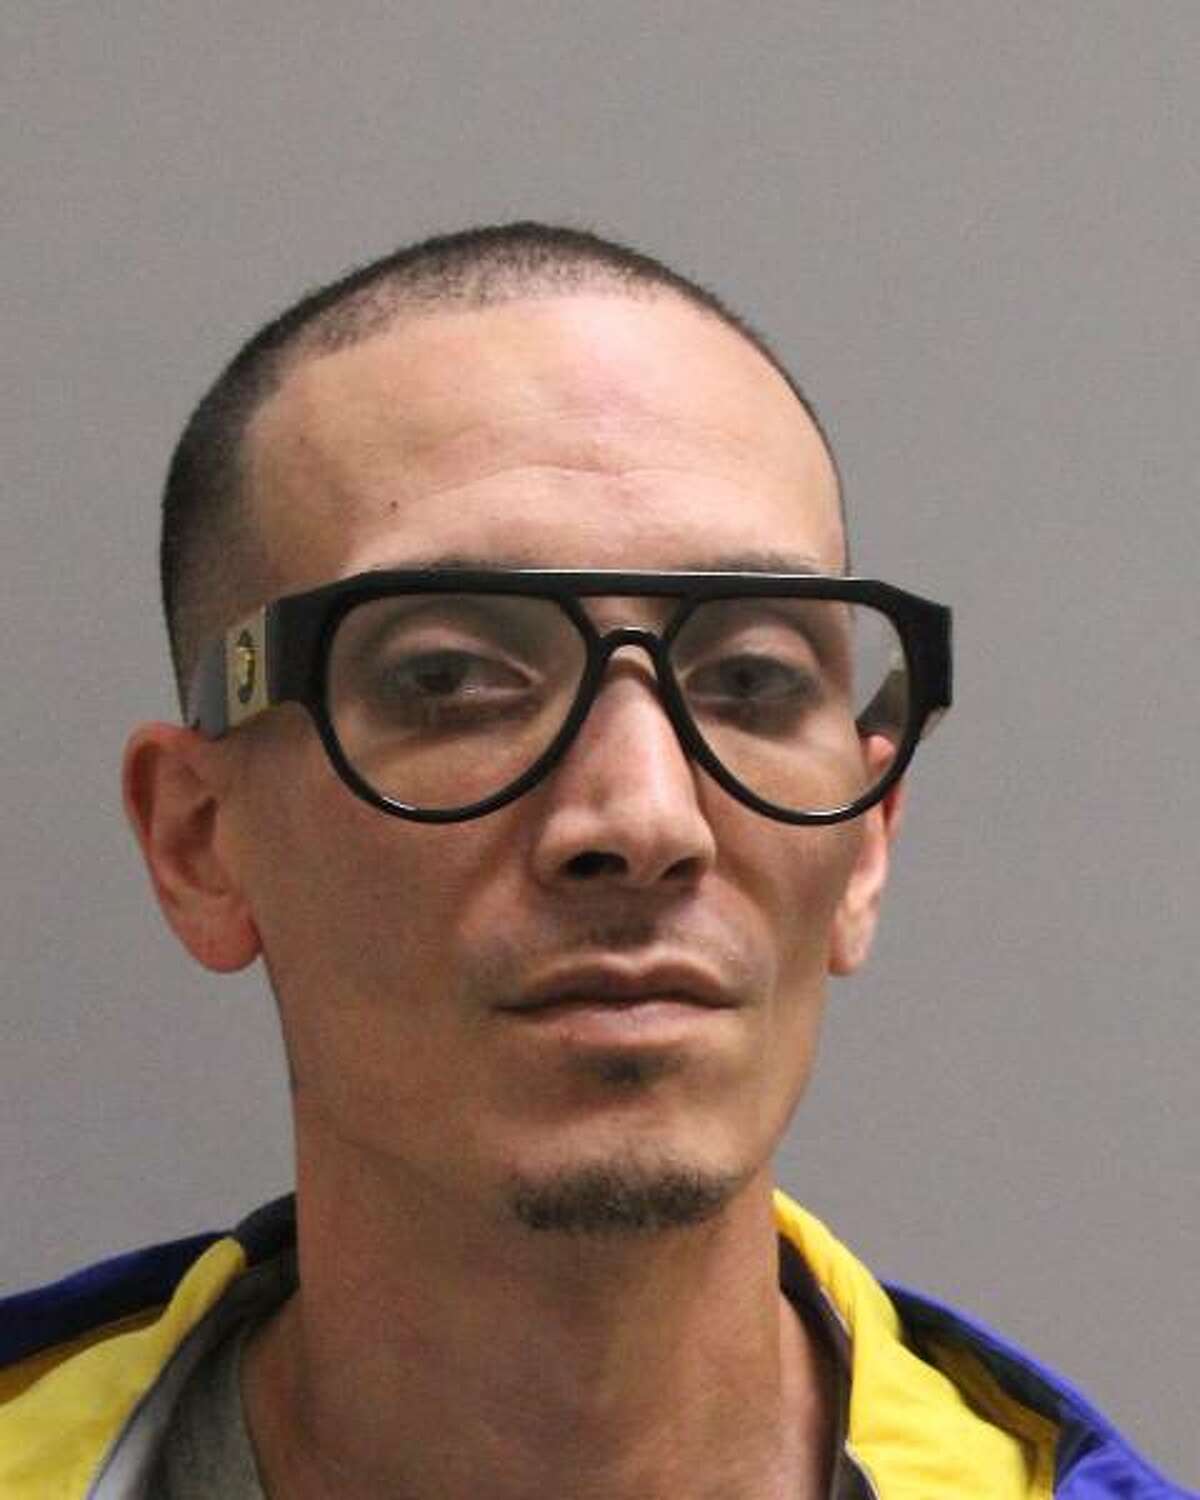 A grand jury has indicted David Ayala on second-degree murder and other charges connected to the Nov. 23 shooting death of Matteo Handerson on a Schenectady street.  